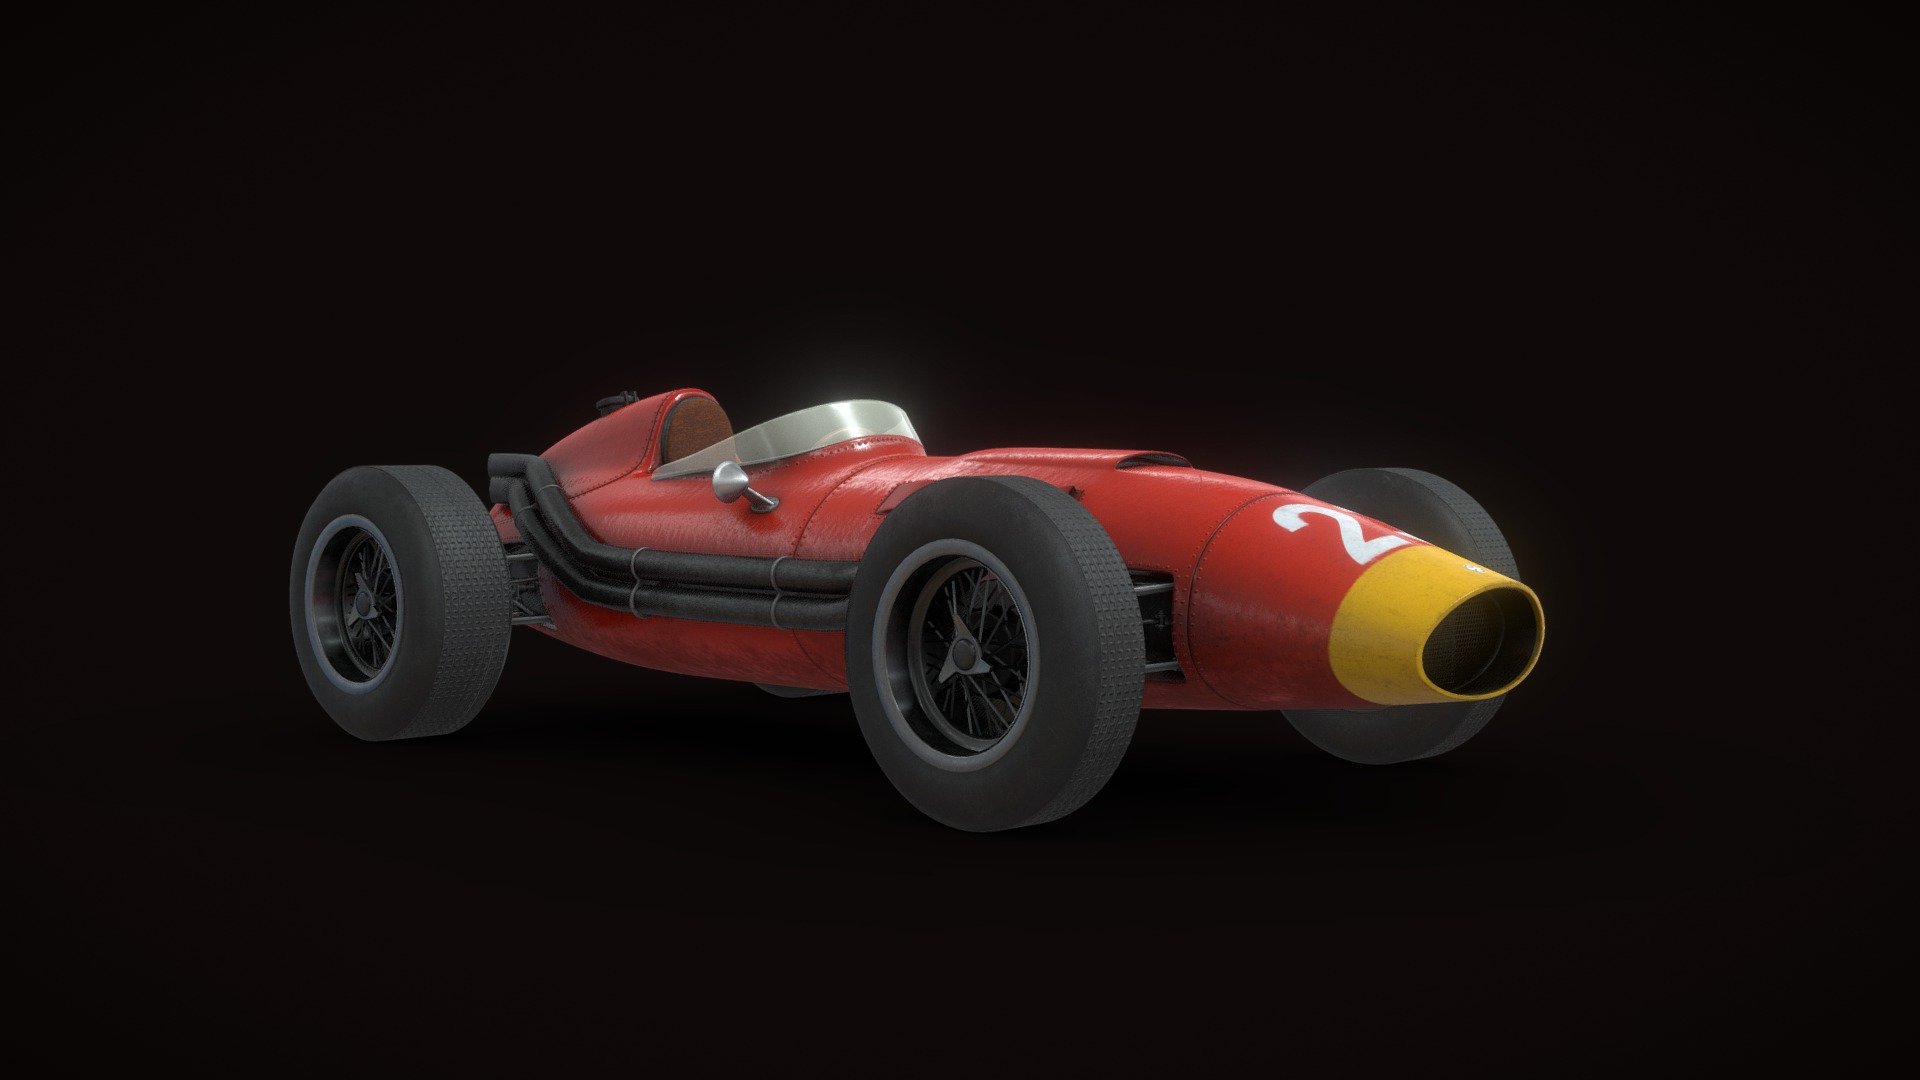 Generic 1950s F1 race car

Recently I decided to update this model a bit for a project of mine. I changed the proportions slightly and redid the texturing.

If you have bought this model before and want to have this version, please contact me with the PayPal transaction ID and I will send it to you for free.

Link to the original model:
https://sketchfab.com/3d-models/generic-f1-vintage-car-a666ec8294d34c1d9f0fed049278ed85 - Generic F1 Vintage Car 2.0 - Buy Royalty Free 3D model by Todor Malakchiev (@todormalakchiev) 3d model